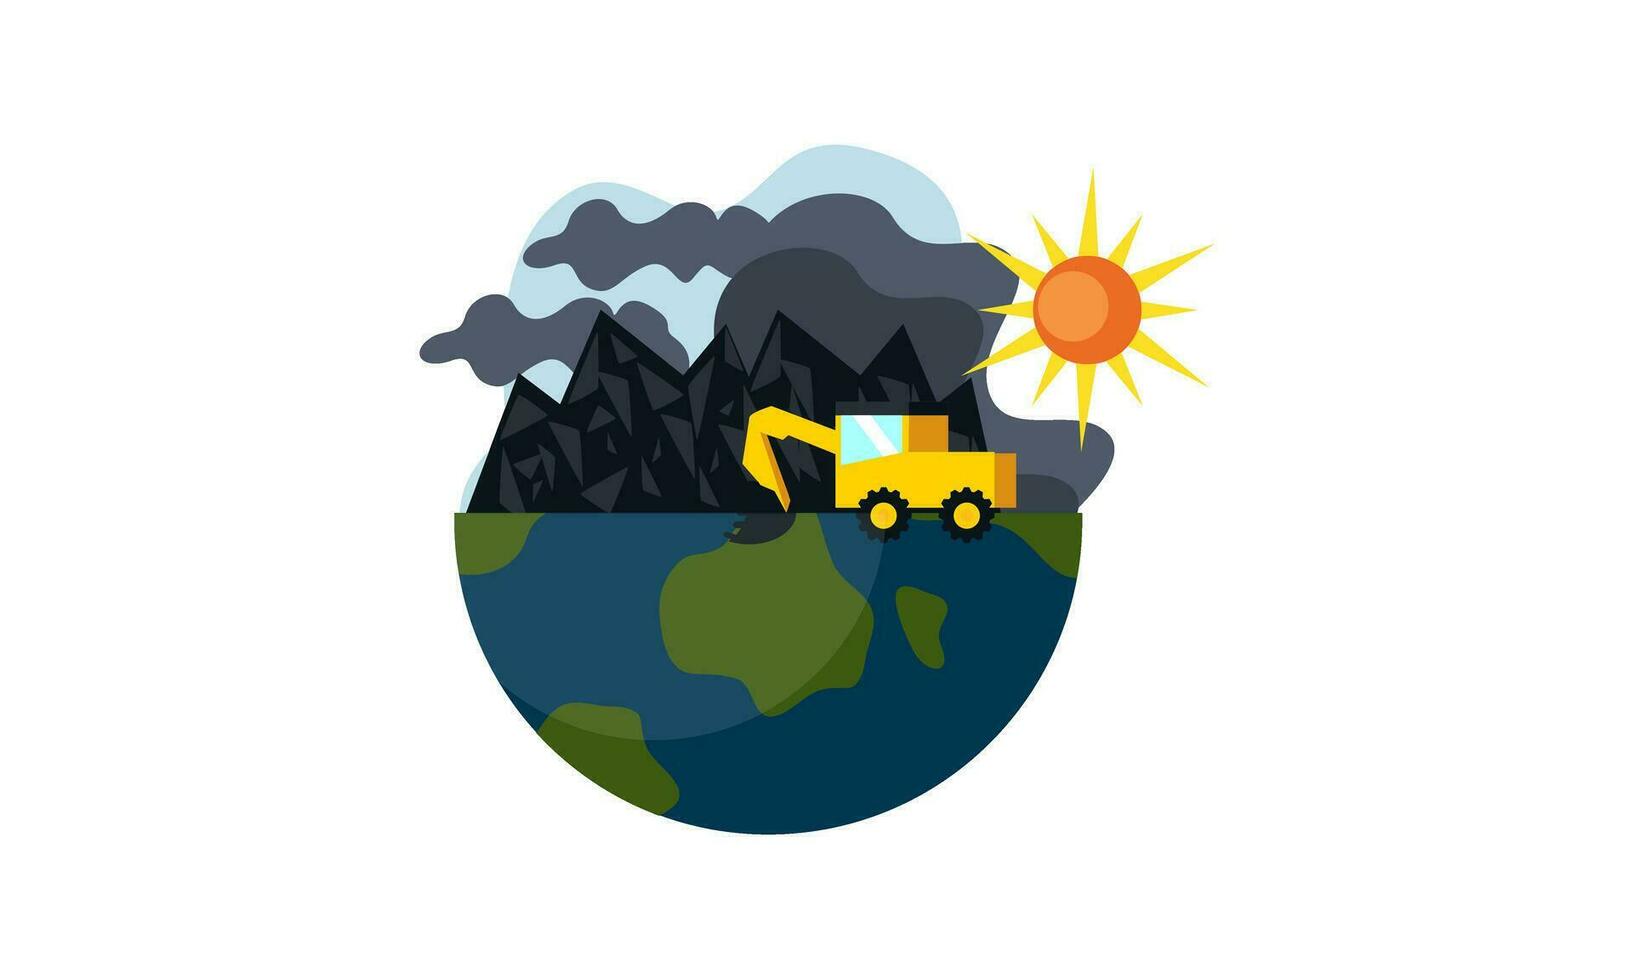 Global warming illustration, environment pollution, global warming heating impact concept vector